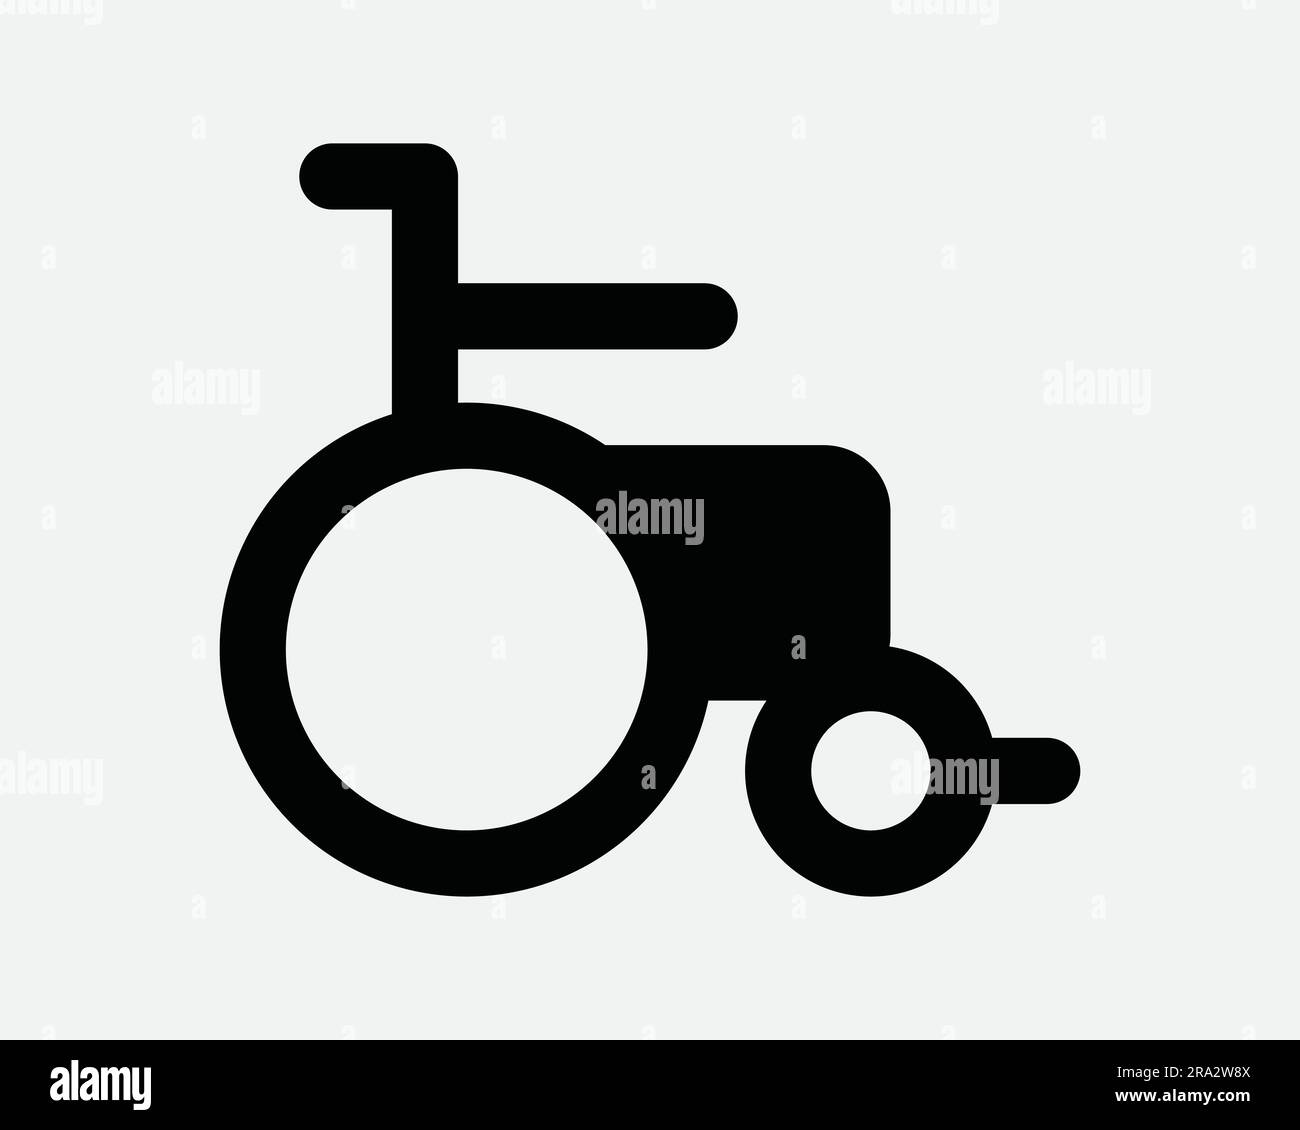 Wheelchair Icon Disabled Disable Disability Wheel Chair Medical Handicap Aid Hospital Care Black White Graphic Clipart Artwork Symbol Sign Vector EPS Stock Vector